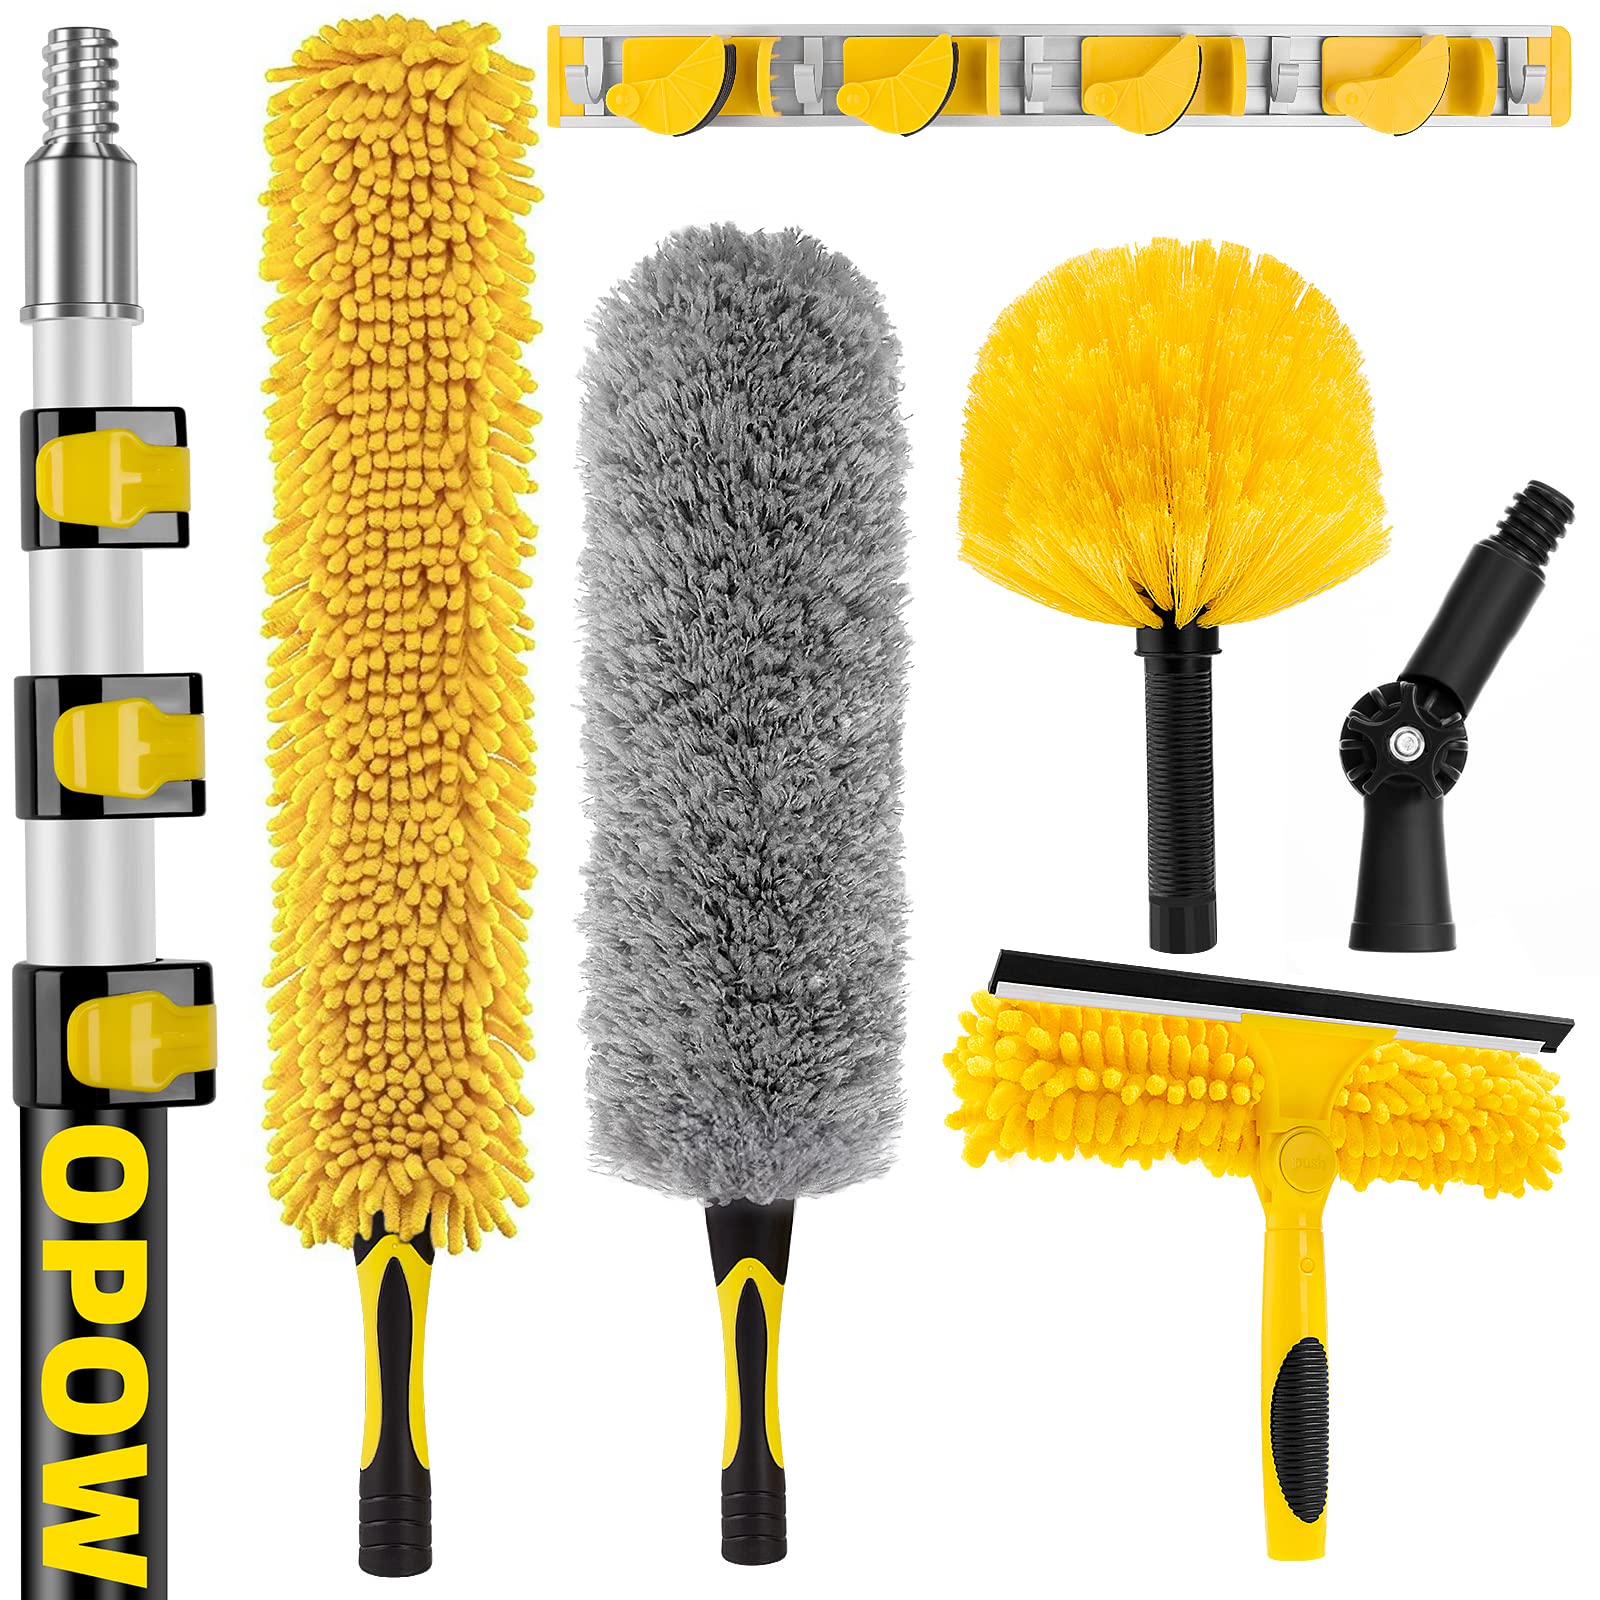 OPOW 25 Foot High Reach Duster Kit with 6-18ft Extension Pole, High Ceiling Fan Duster w/Telescopic Pole, Cobweb Duster, Feather Dust